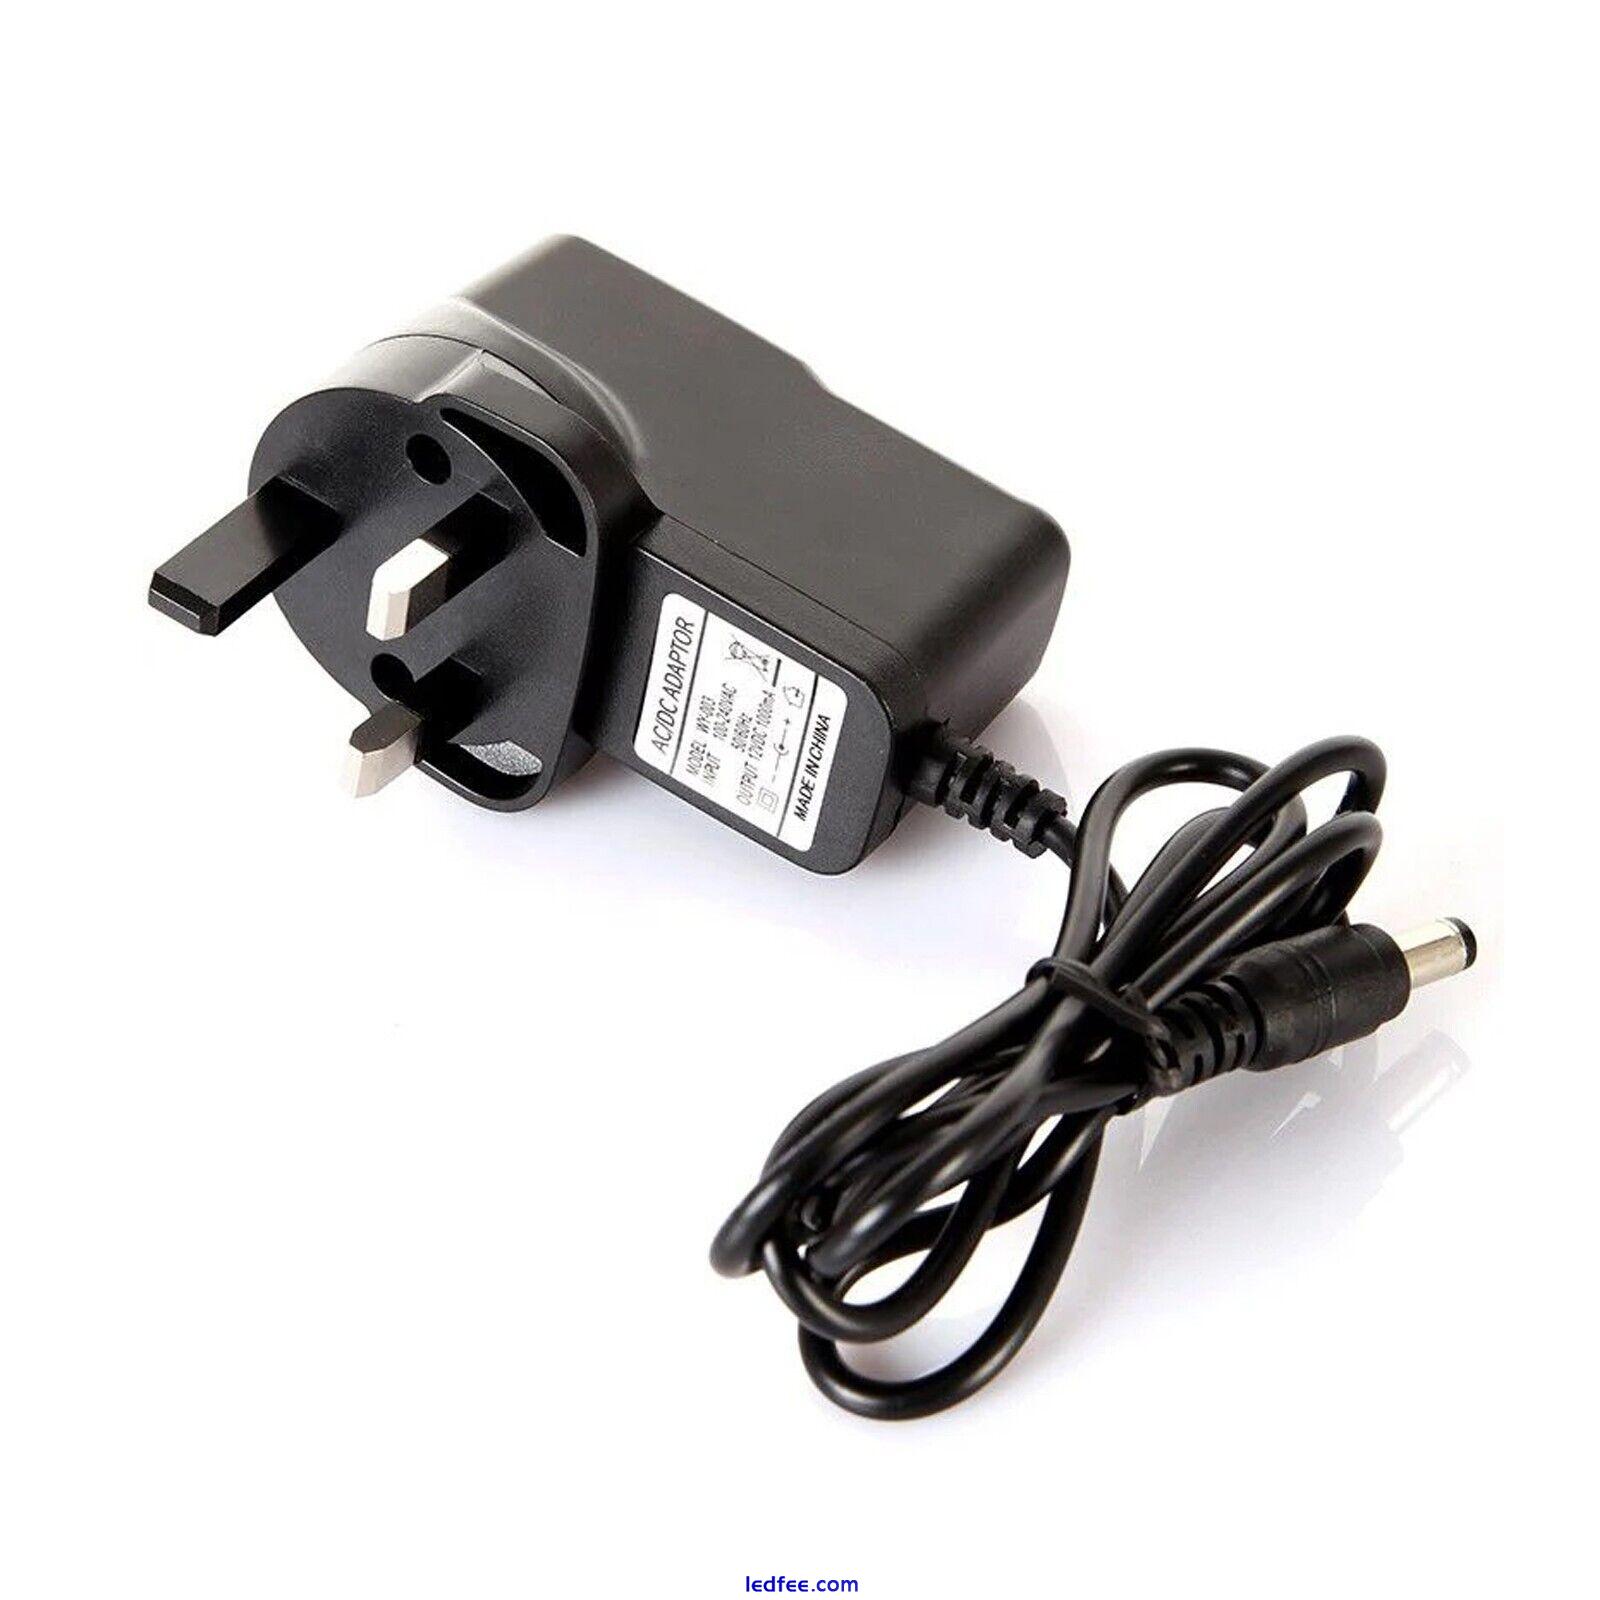 12V AC-DC Power Supply Safety Adapter 1A 2A UK Charger For LED Strip CCTV Camera 4 